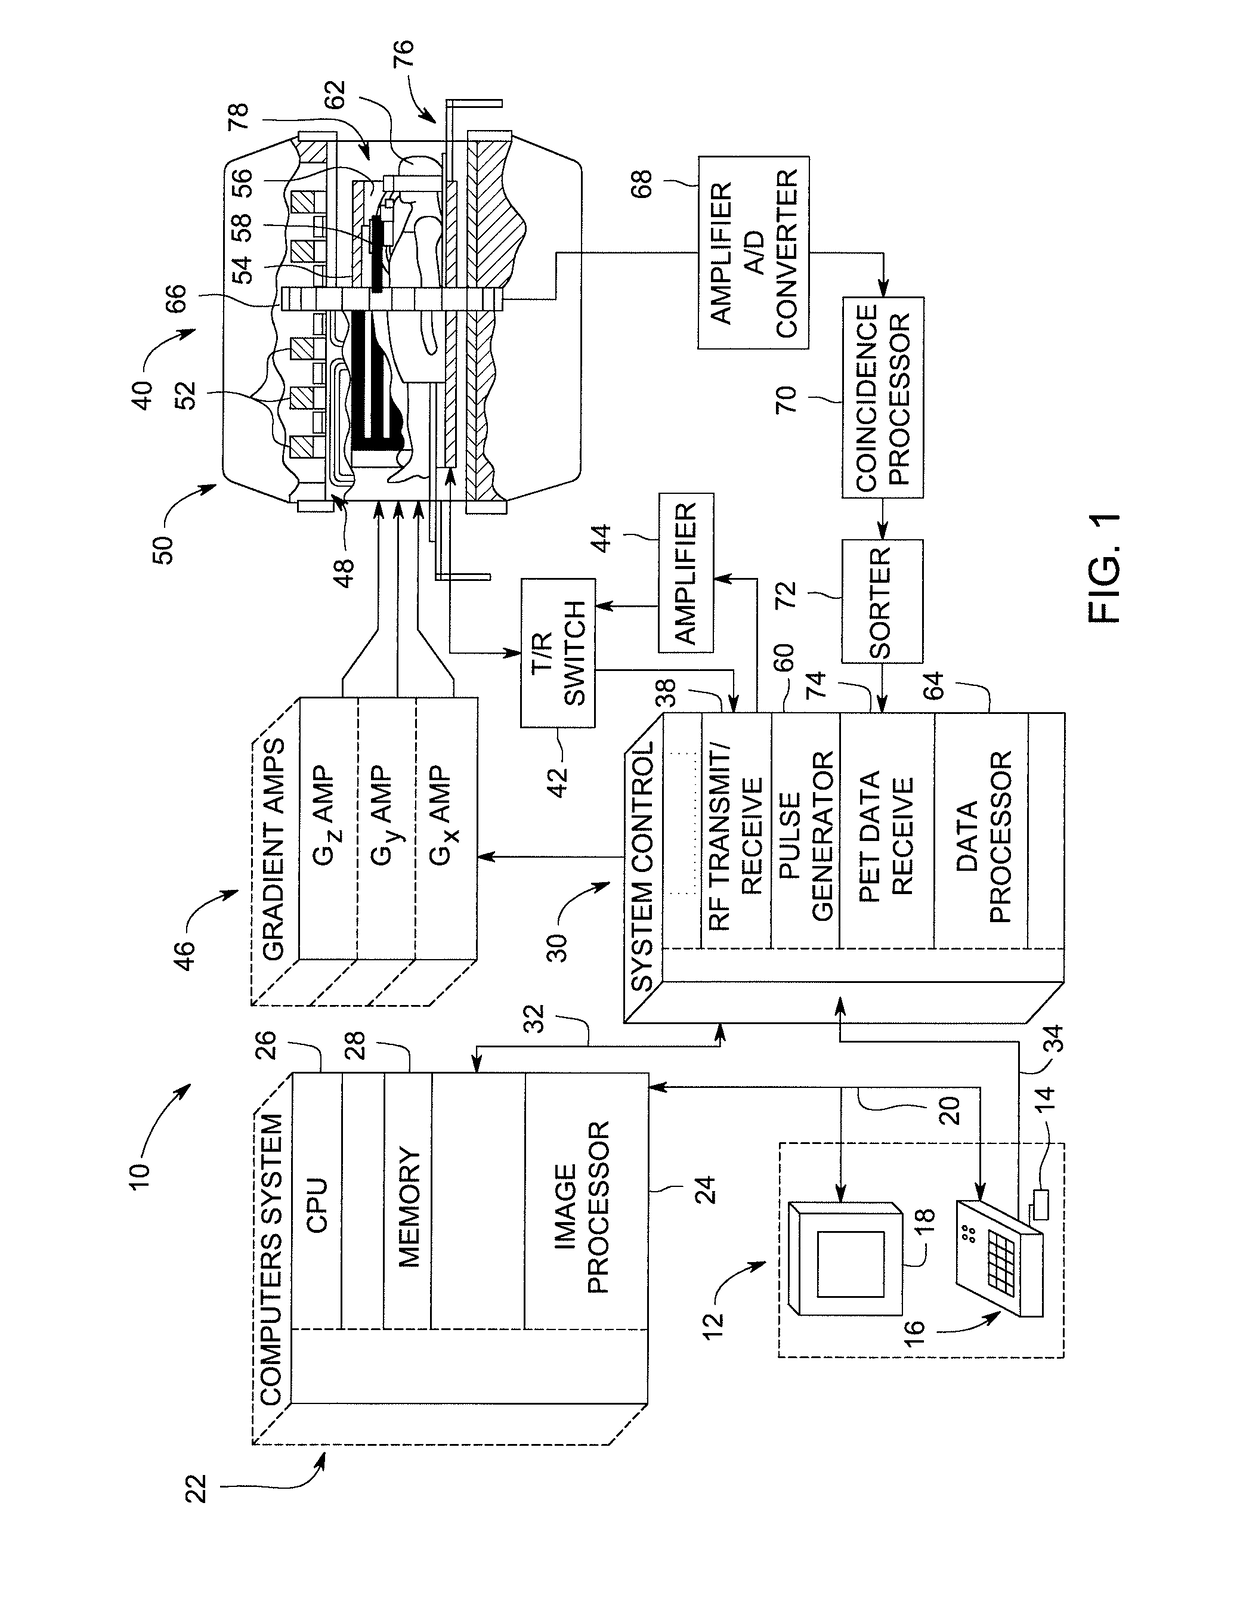 System and method for attenuation correction of a surface coil in a PET-MRI system